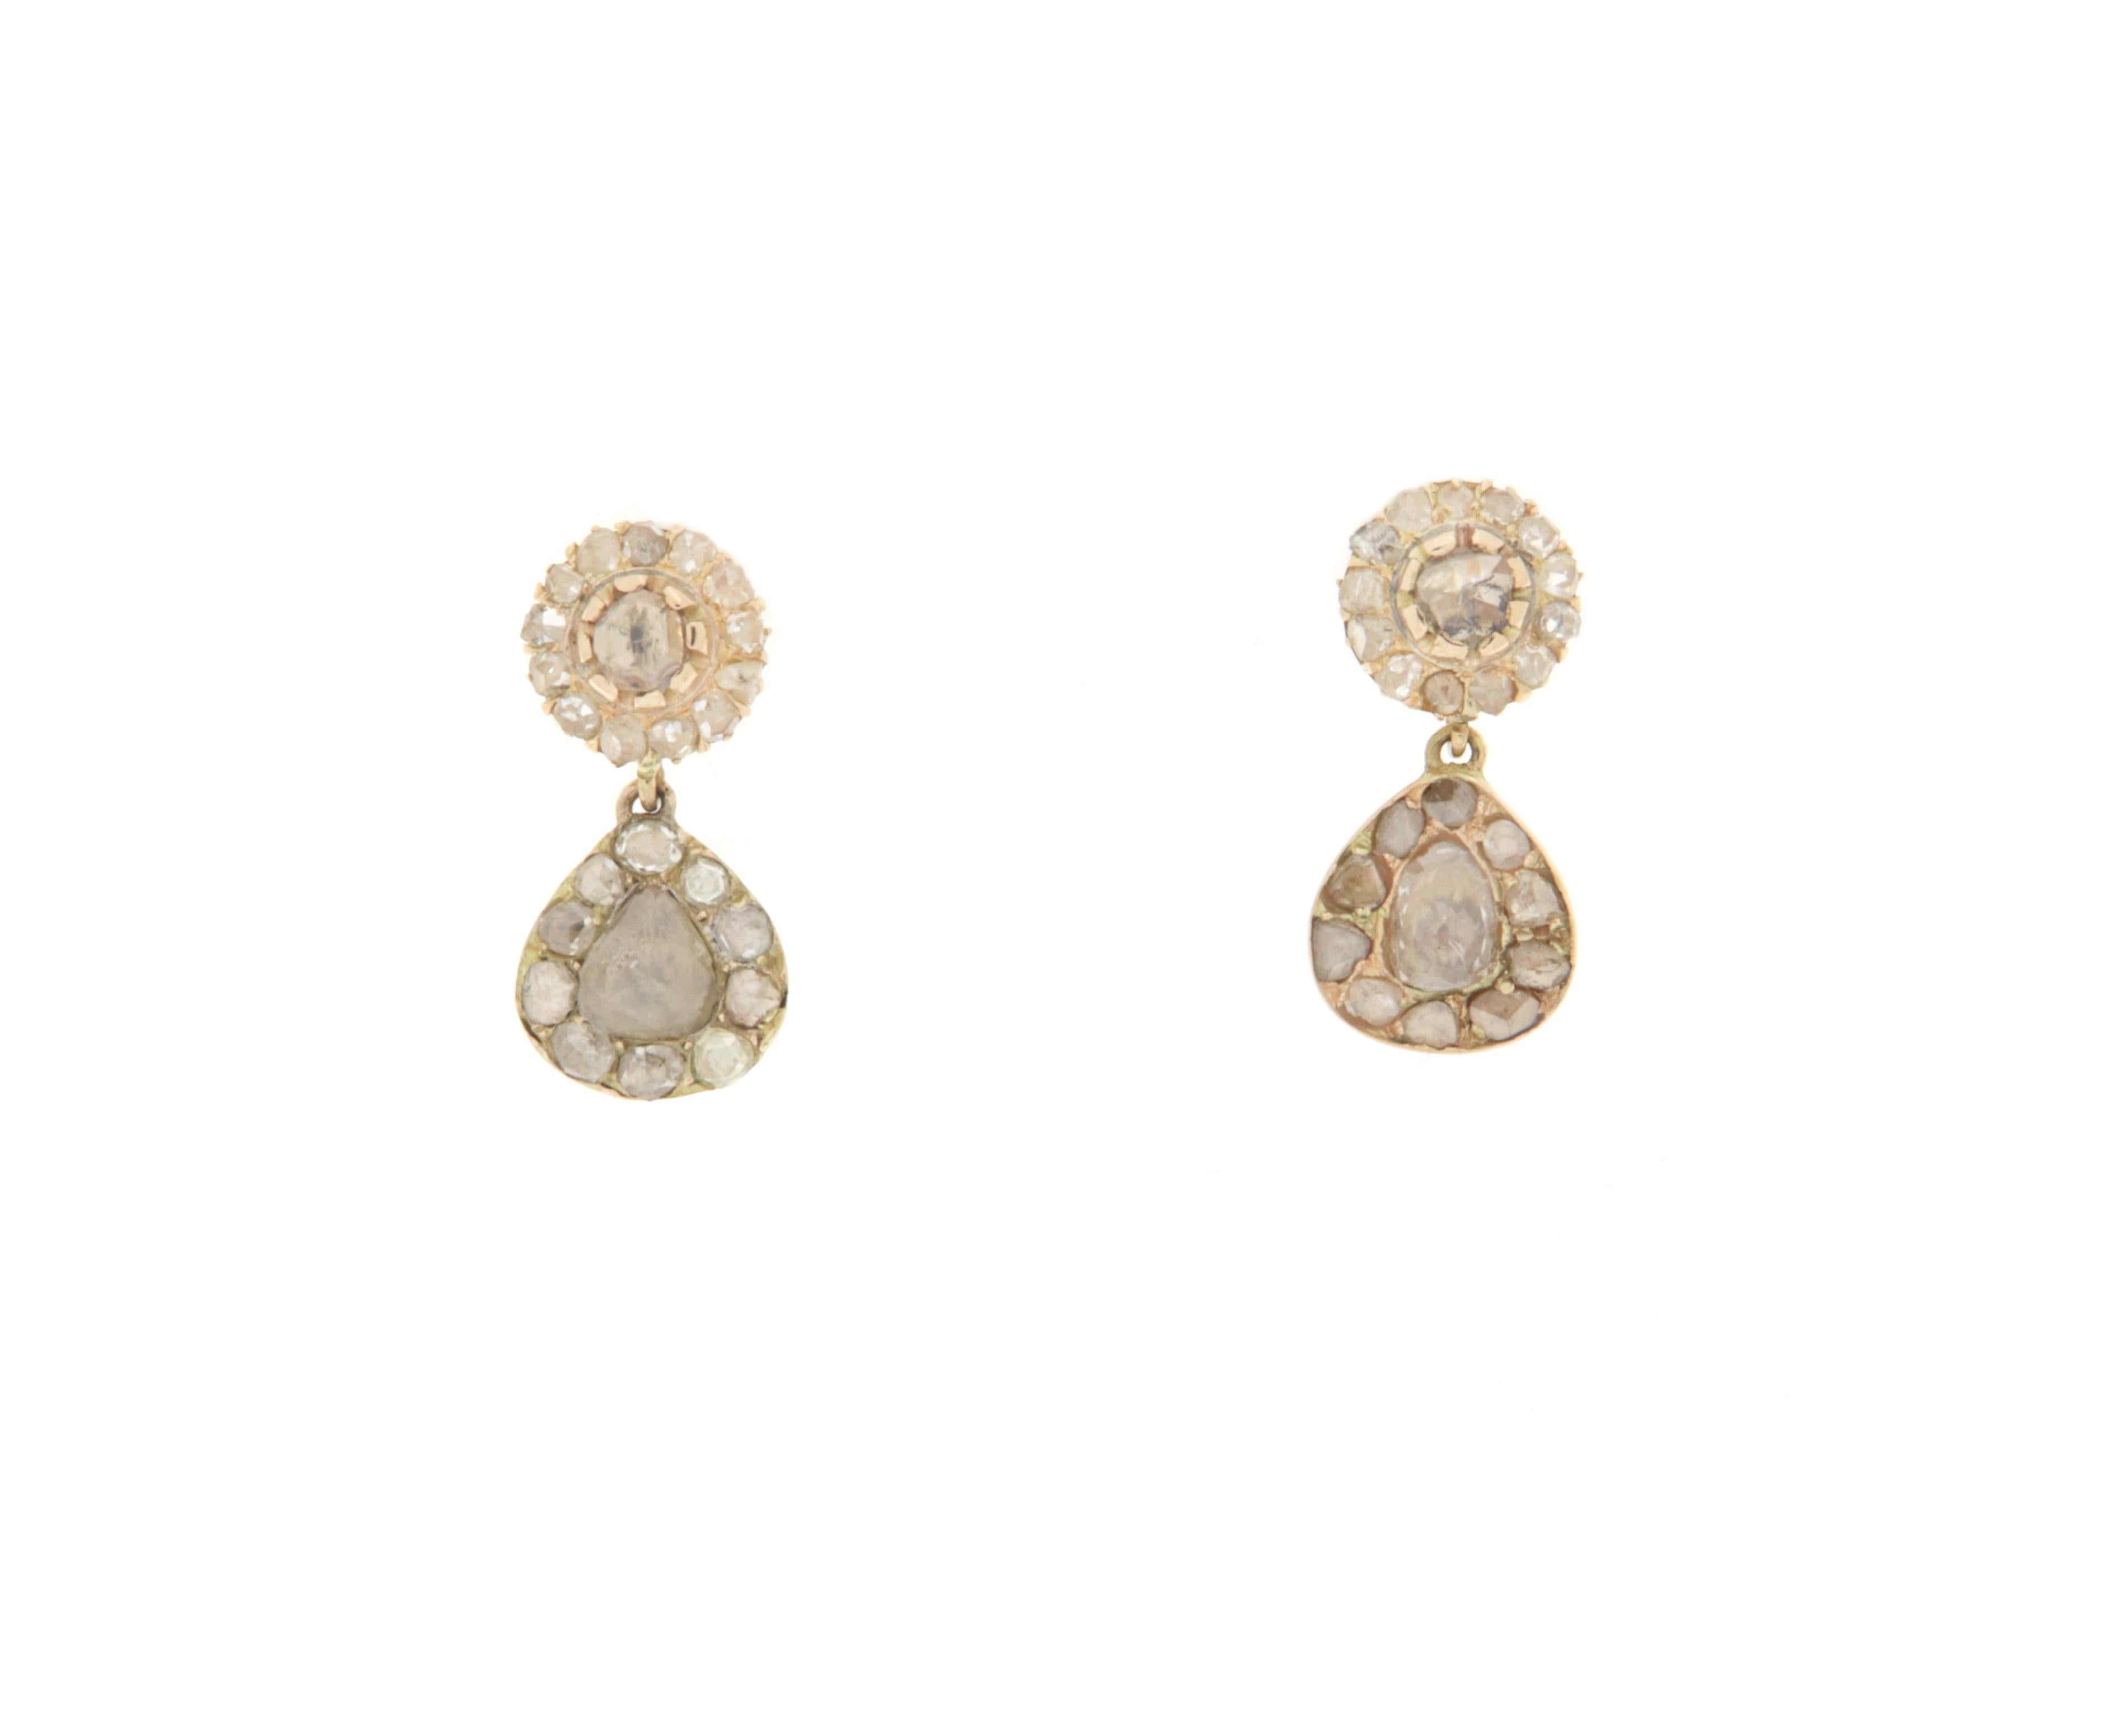 Spectacular earring made on the ancient style that fully conveys the flavor of the past Victorian era, made by Neapolitan goldsmiths in 14-karat yellow gold,
There are set diamonds of different sizes for a total of 4.85 carats.
An earring suitable